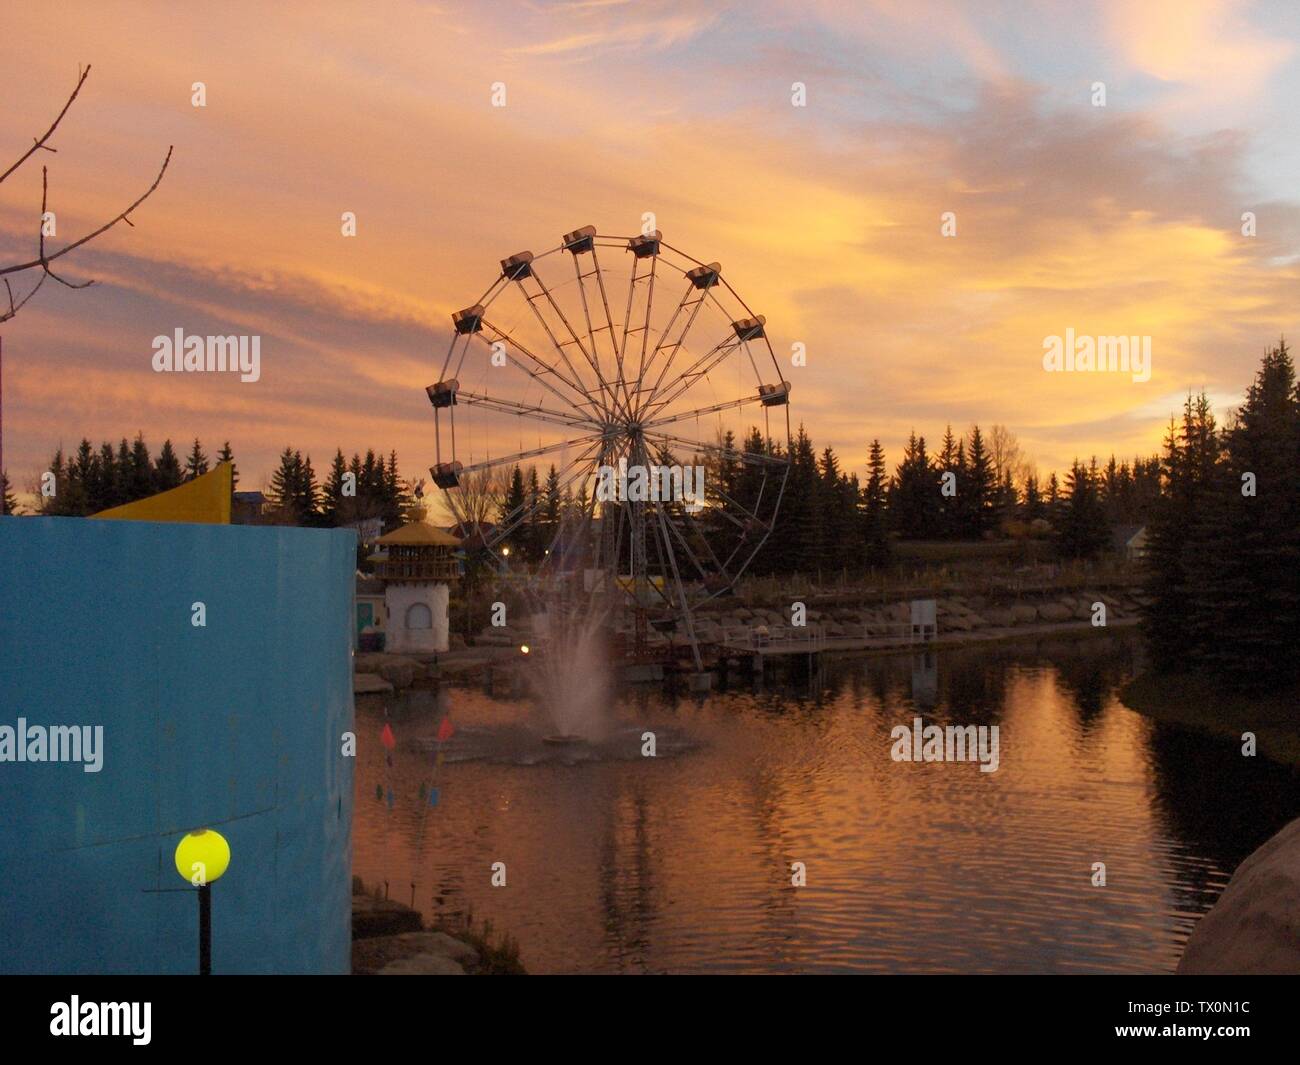 Calaway Park (Calgary, Canada) - Big Eli (Calaway's name for their Ferris Wheel) in front of a sunset. Also shown are the Twiz and Twirl Maze (left) and Mulliganâ€™s Island Mini Golf (imte left of Big Eli).; 9 October 2006; Picture shot by employee (ride operator) of Calaway; Jonathan Verge; Stock Photo